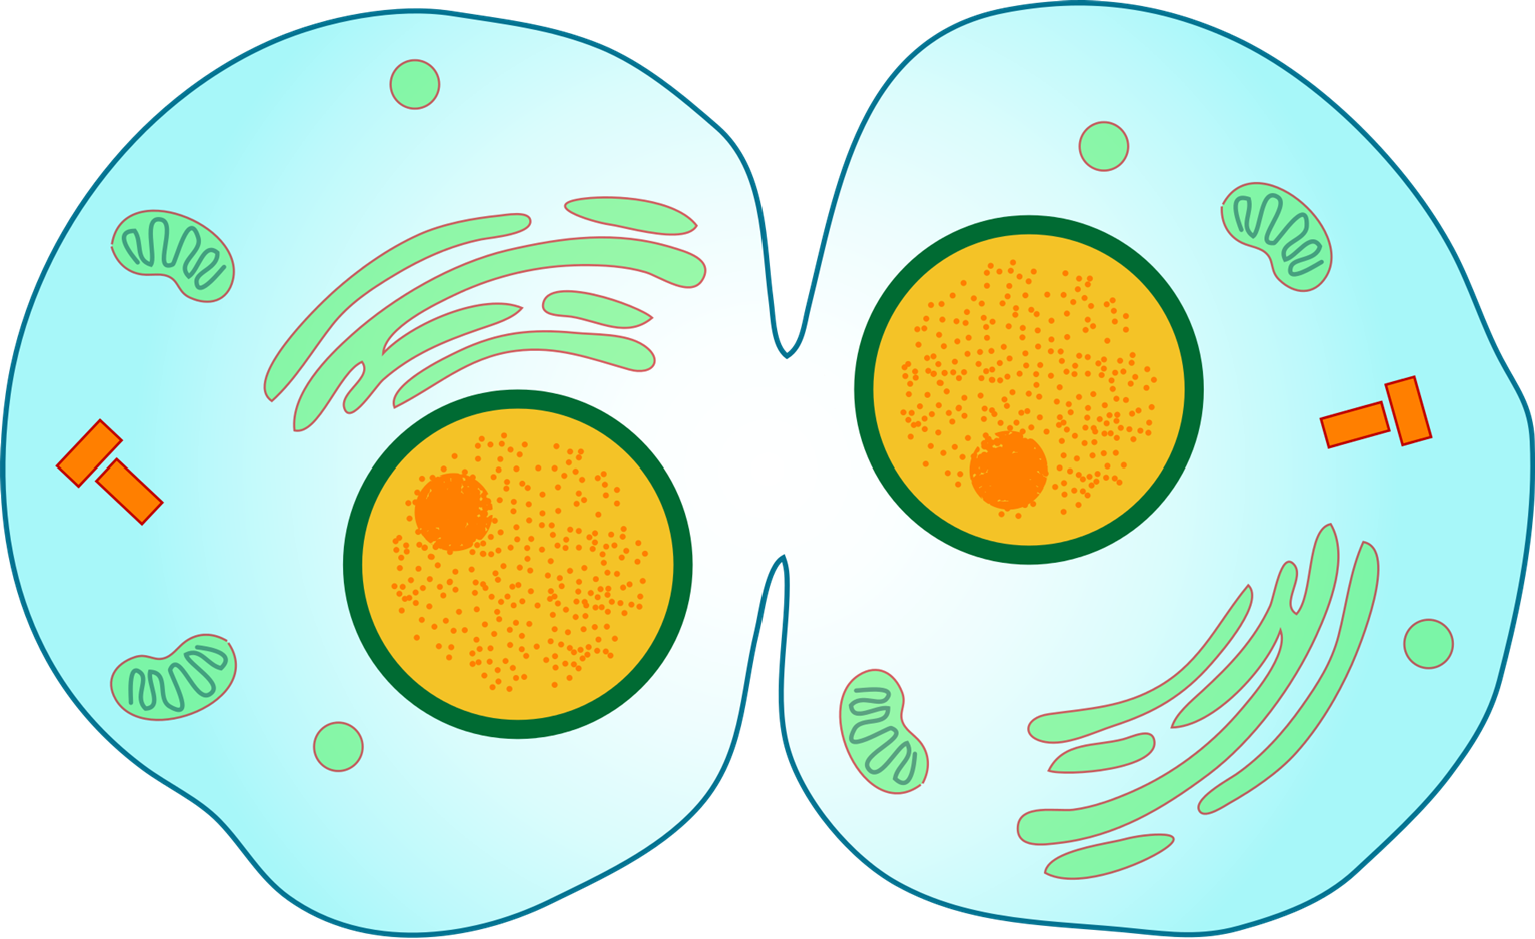 Illustration of a cell undergoing cytokinesis